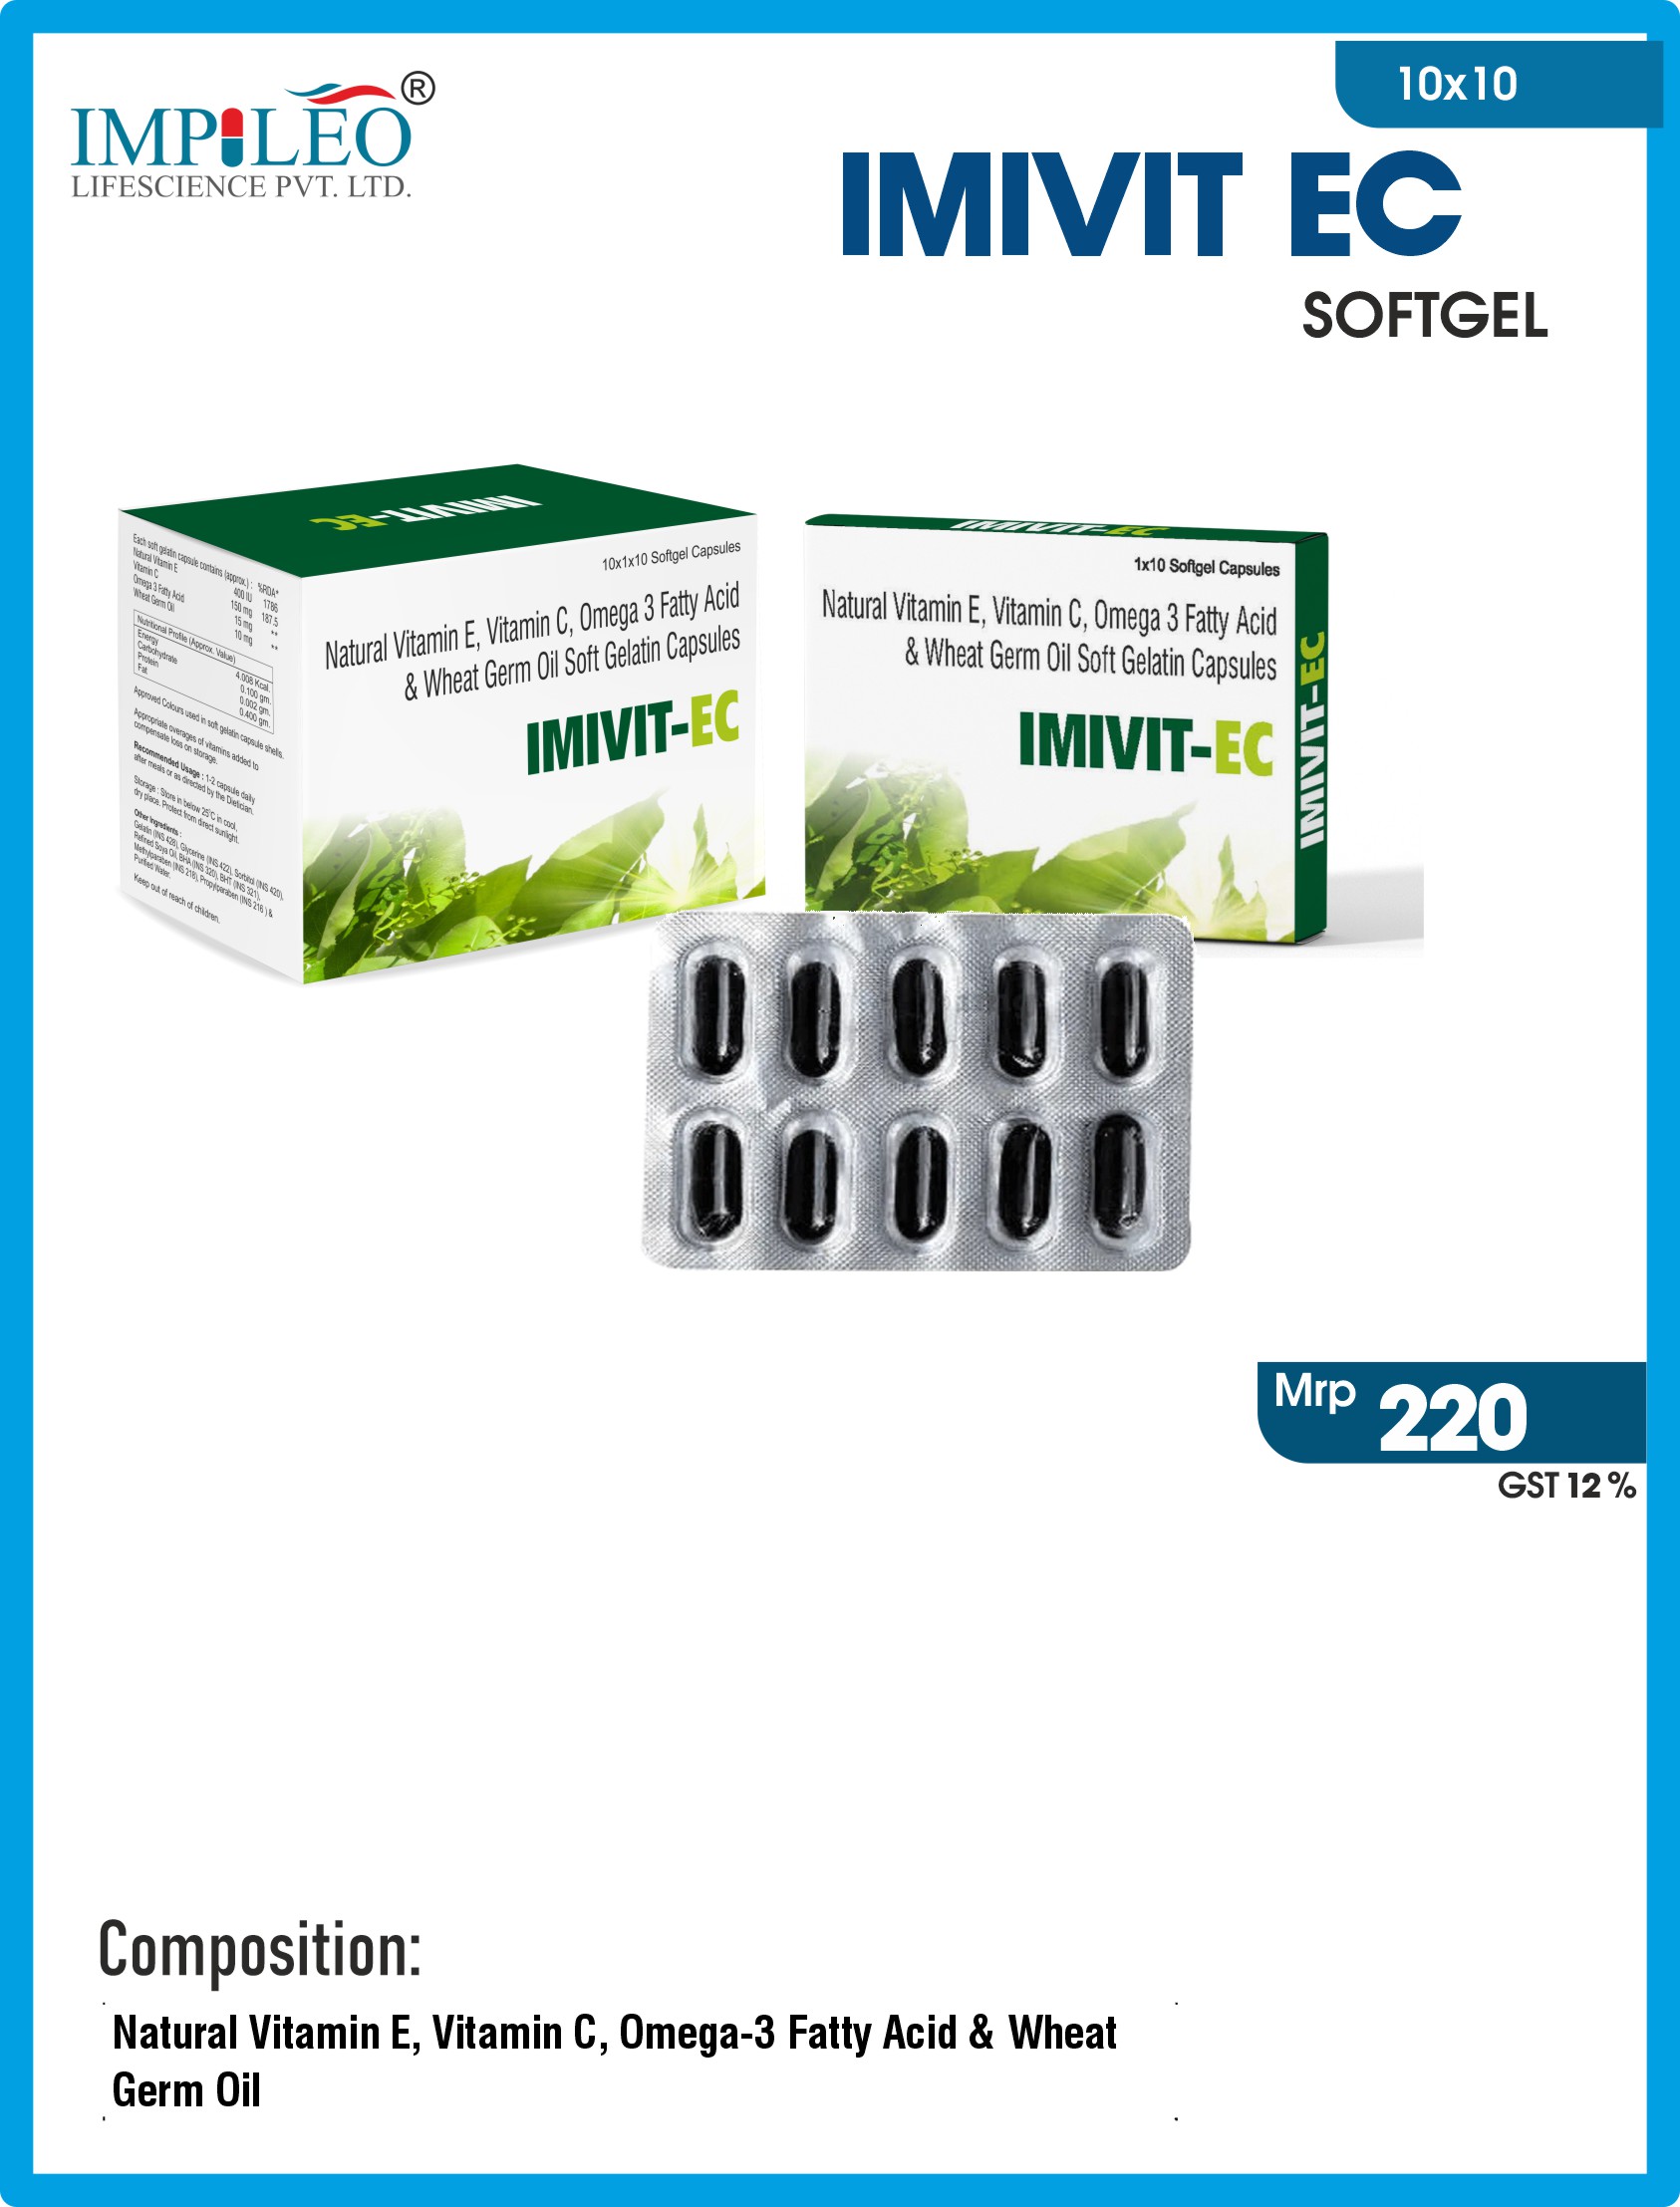 Discover Superior Health Support : IMIVIT EC Softgel Capsules from Trusted Third Party Manufacturing in India